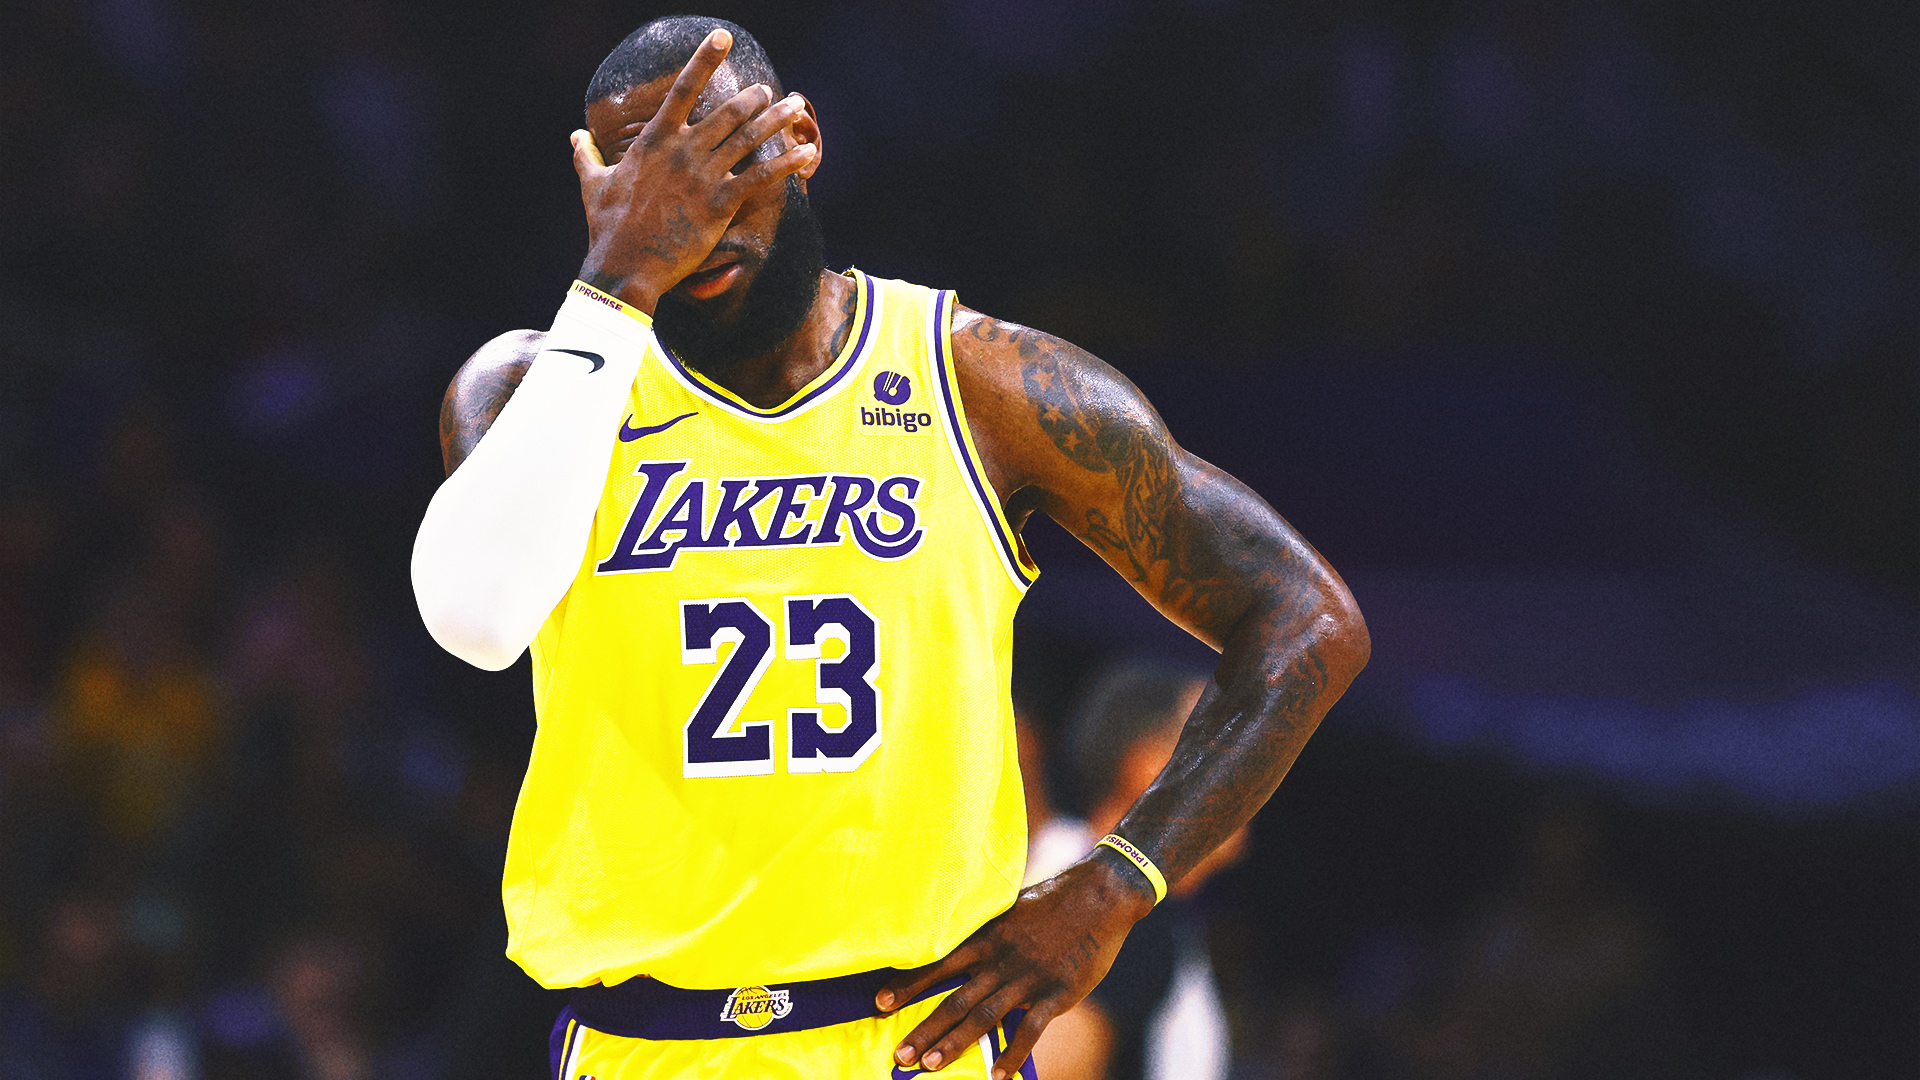 LeBron James breaks NBA's all-time minutes record as Lakers lose to Sixers 138-94